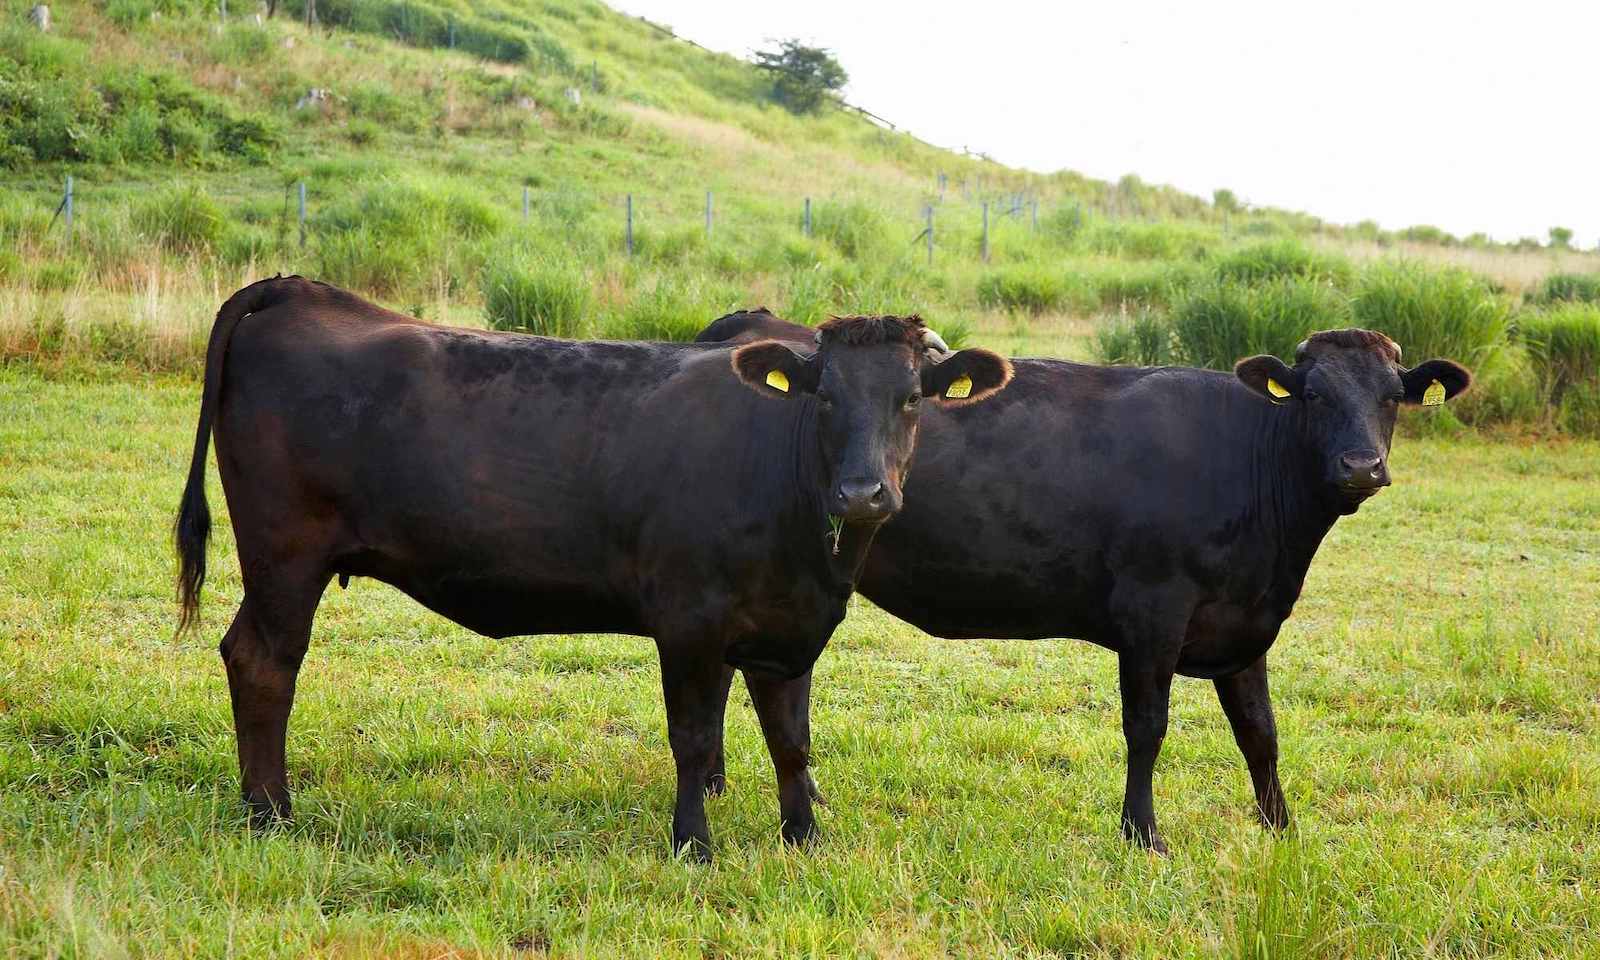 Black Wagyu cattle, bred in Japan